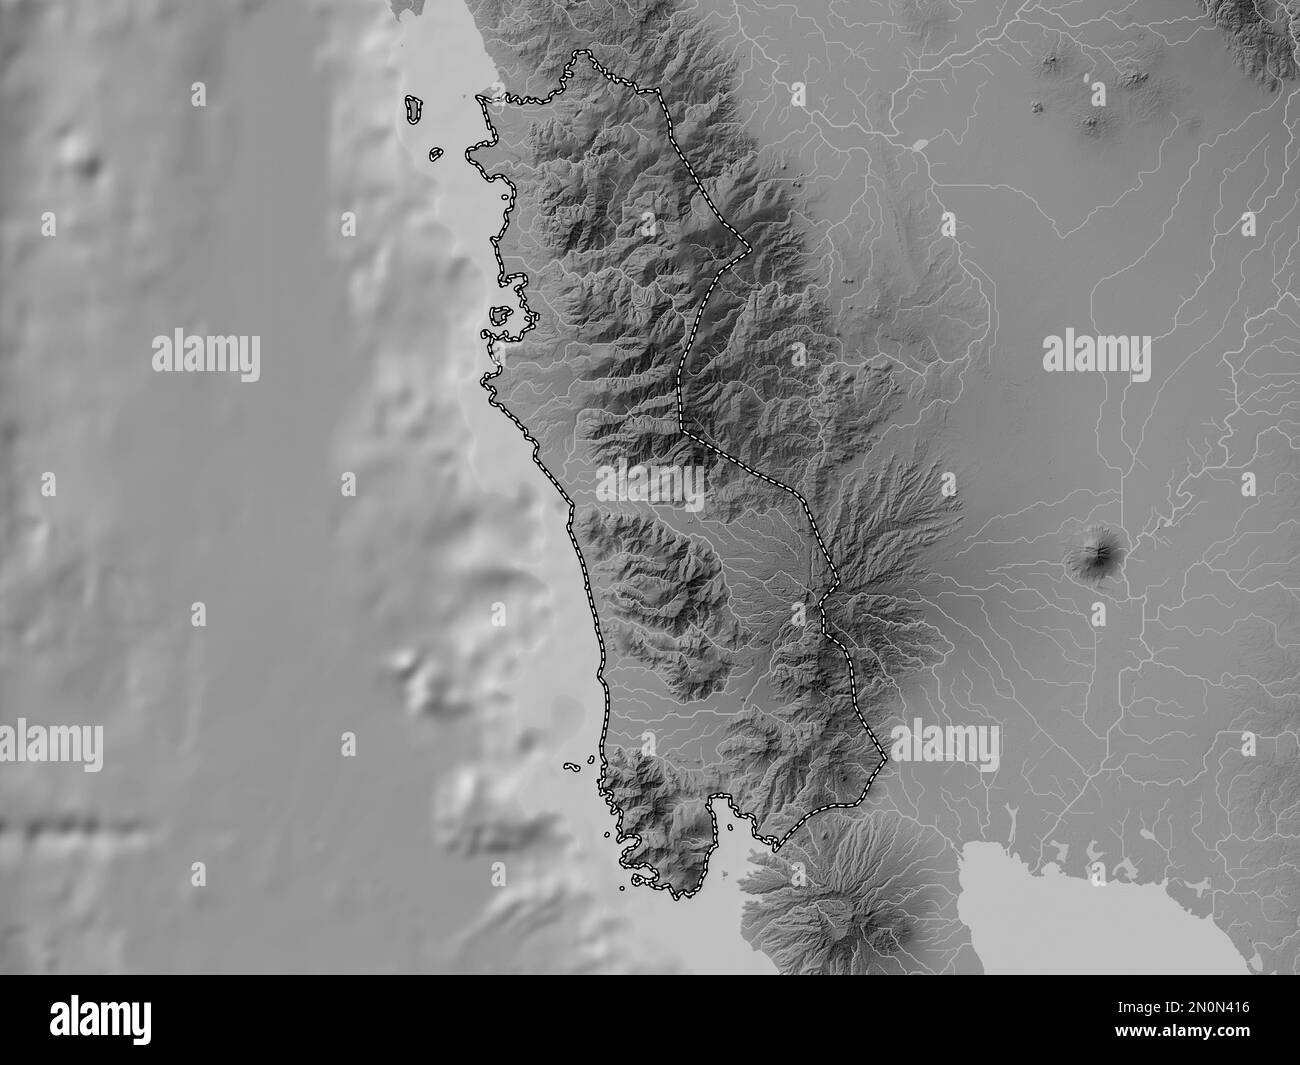 Zambales, province of Philippines. Grayscale elevation map with lakes and rivers Stock Photo